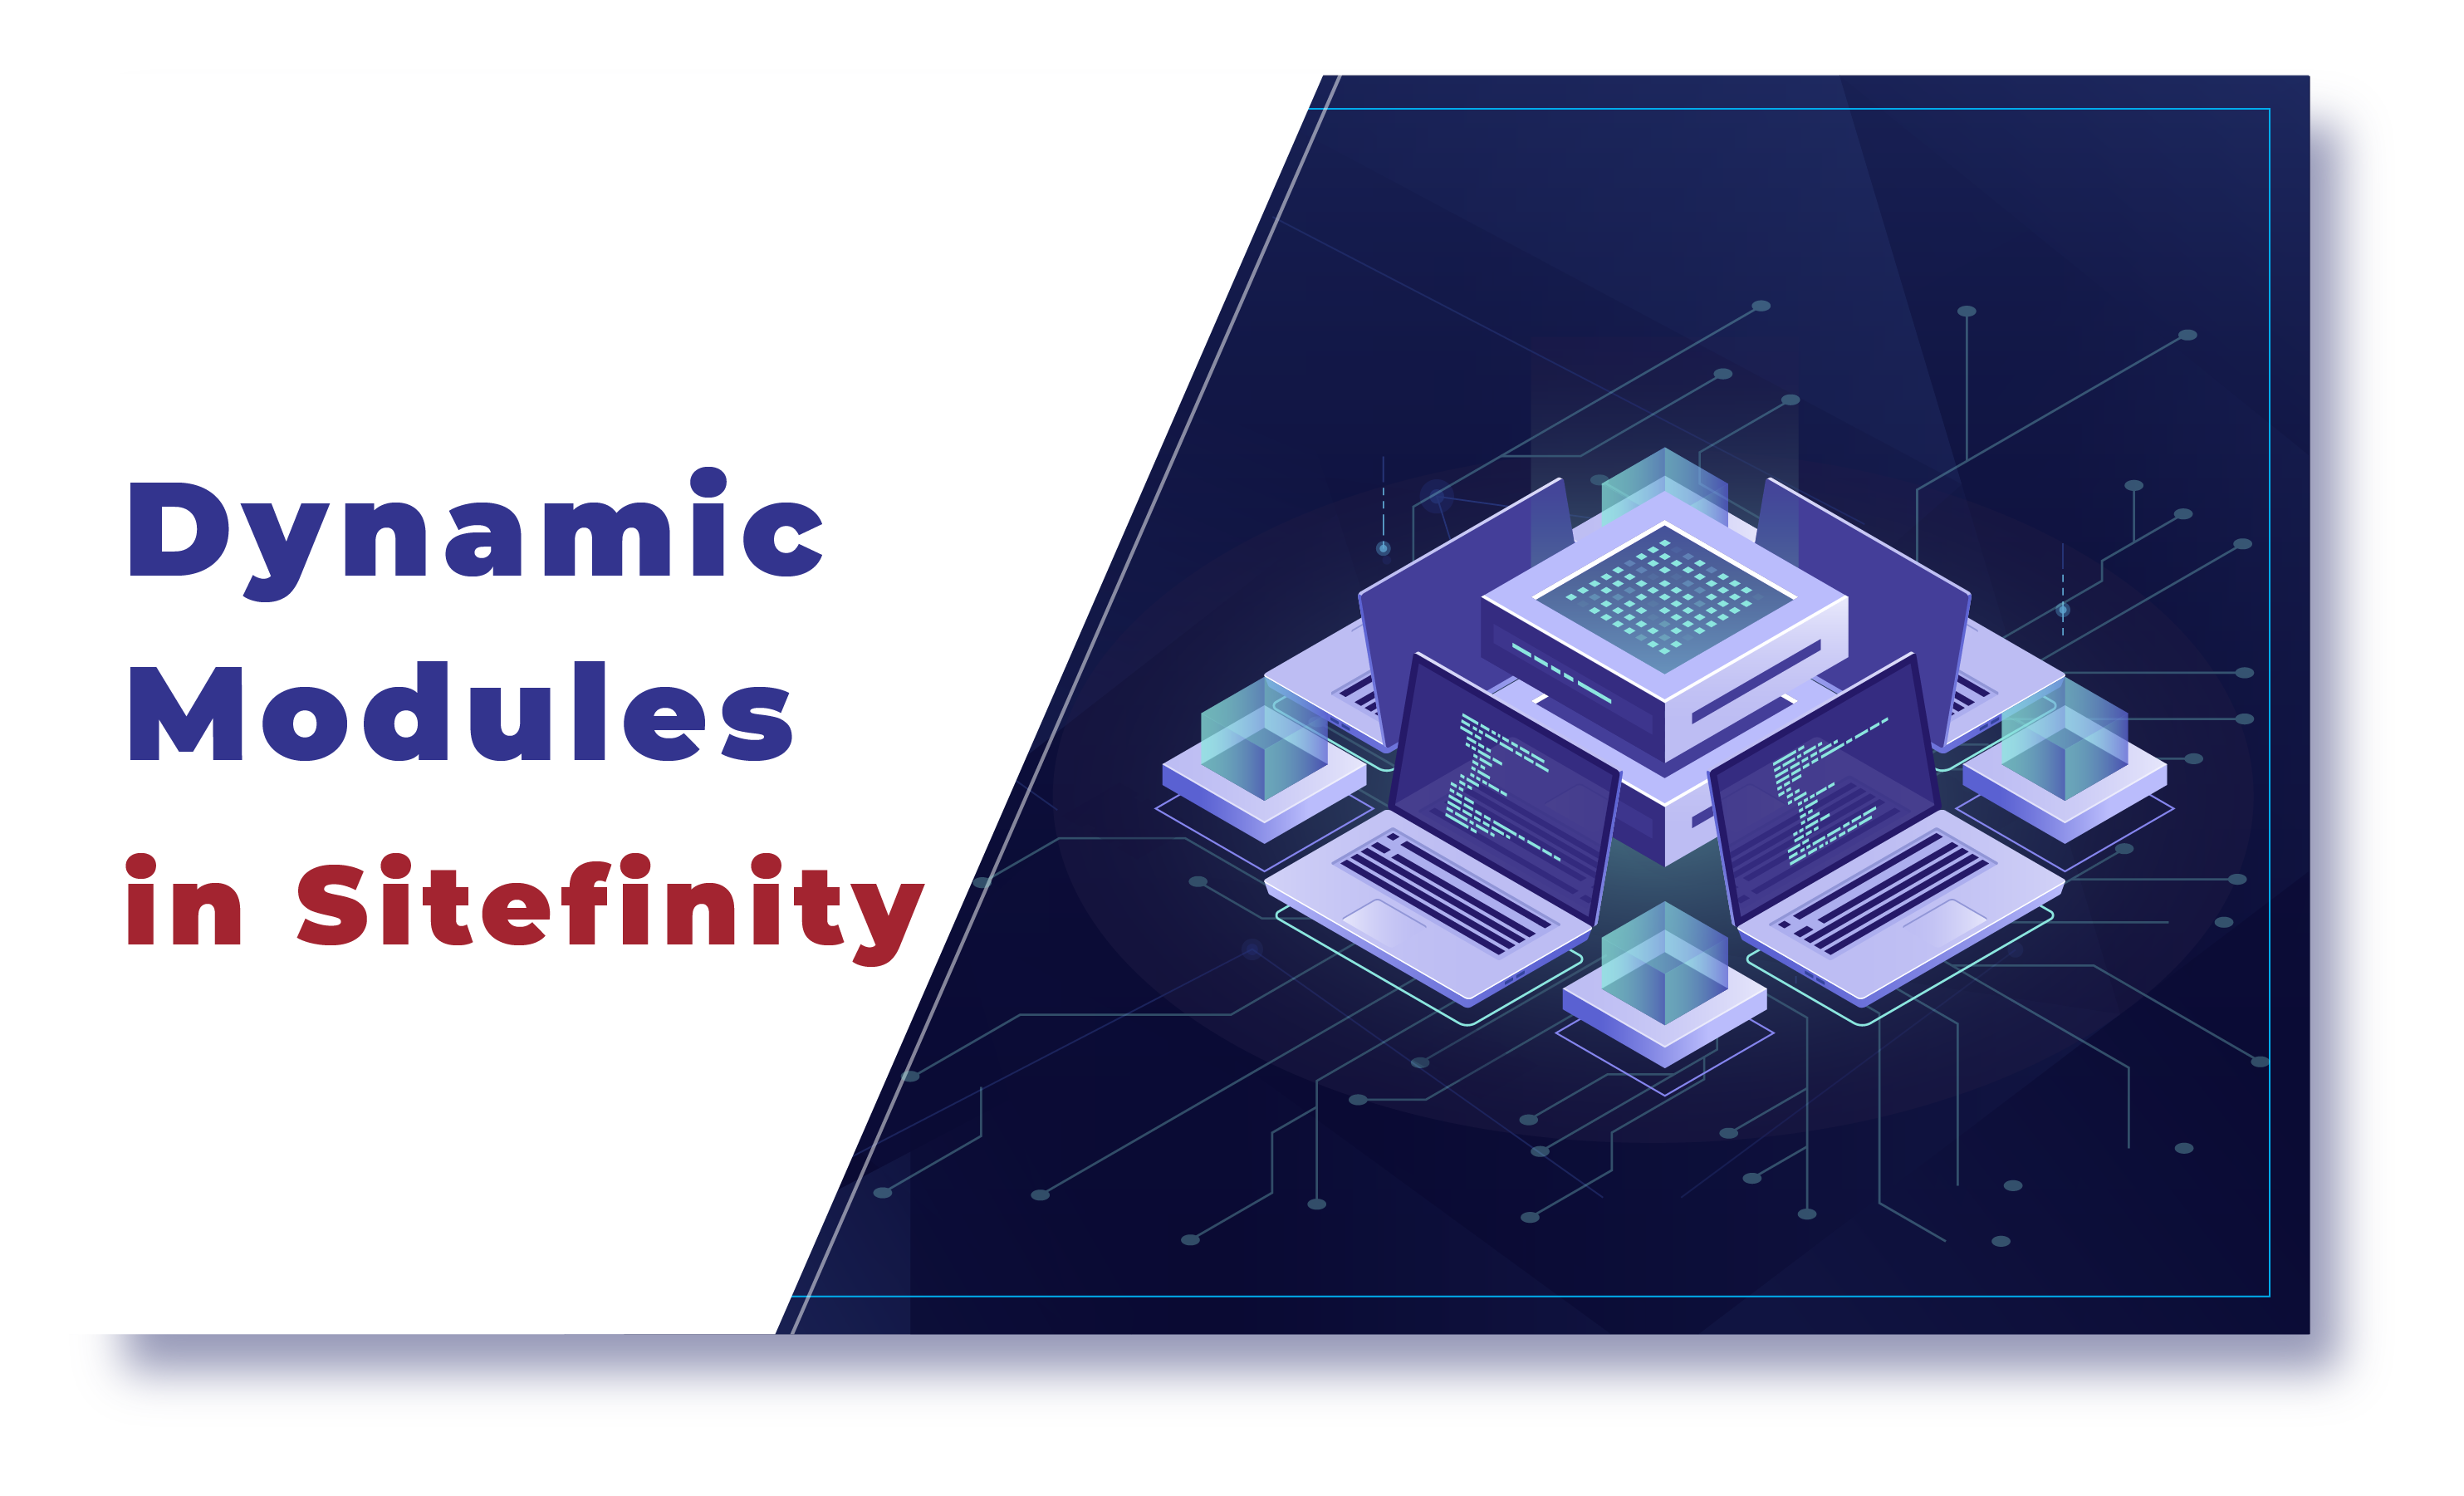 Get started with Dynamic Modules in Sitefinity – Thomsun Infocare